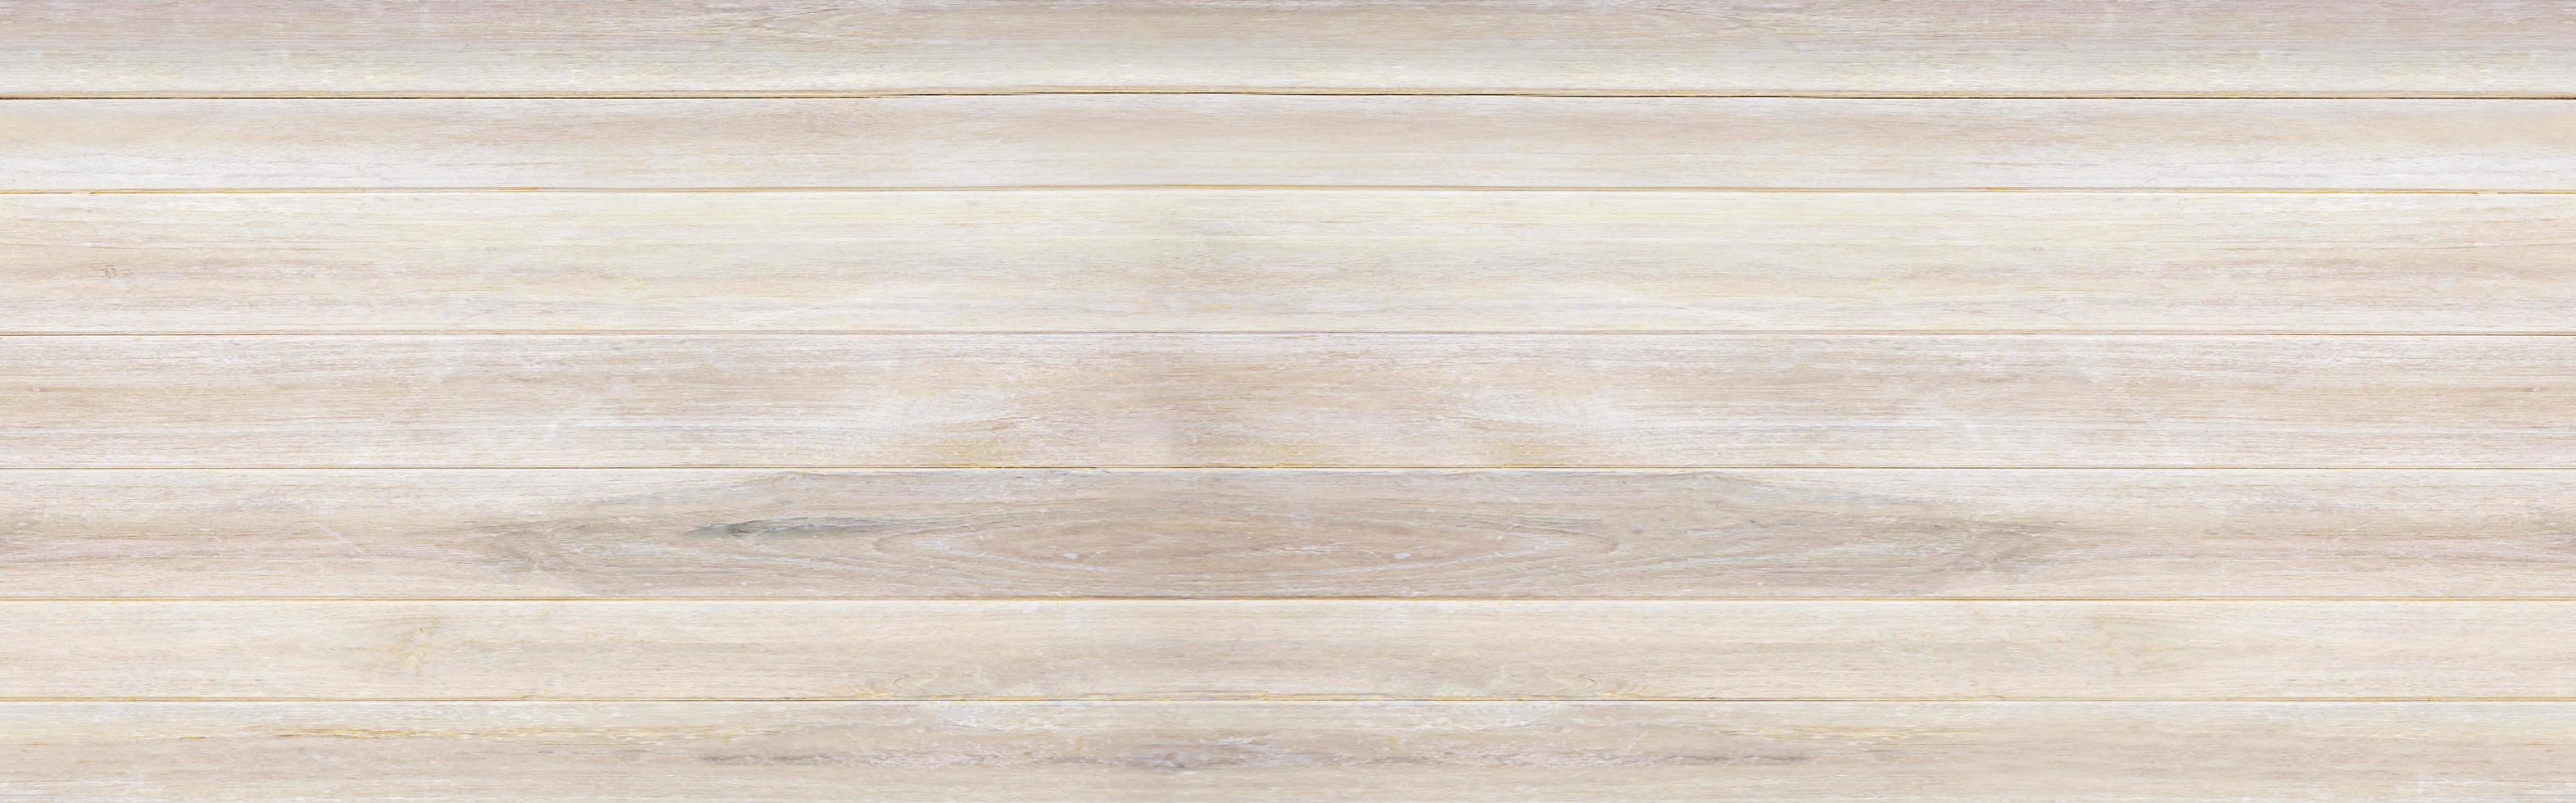 Panorama of brown wood plank texture and seamless background. photo